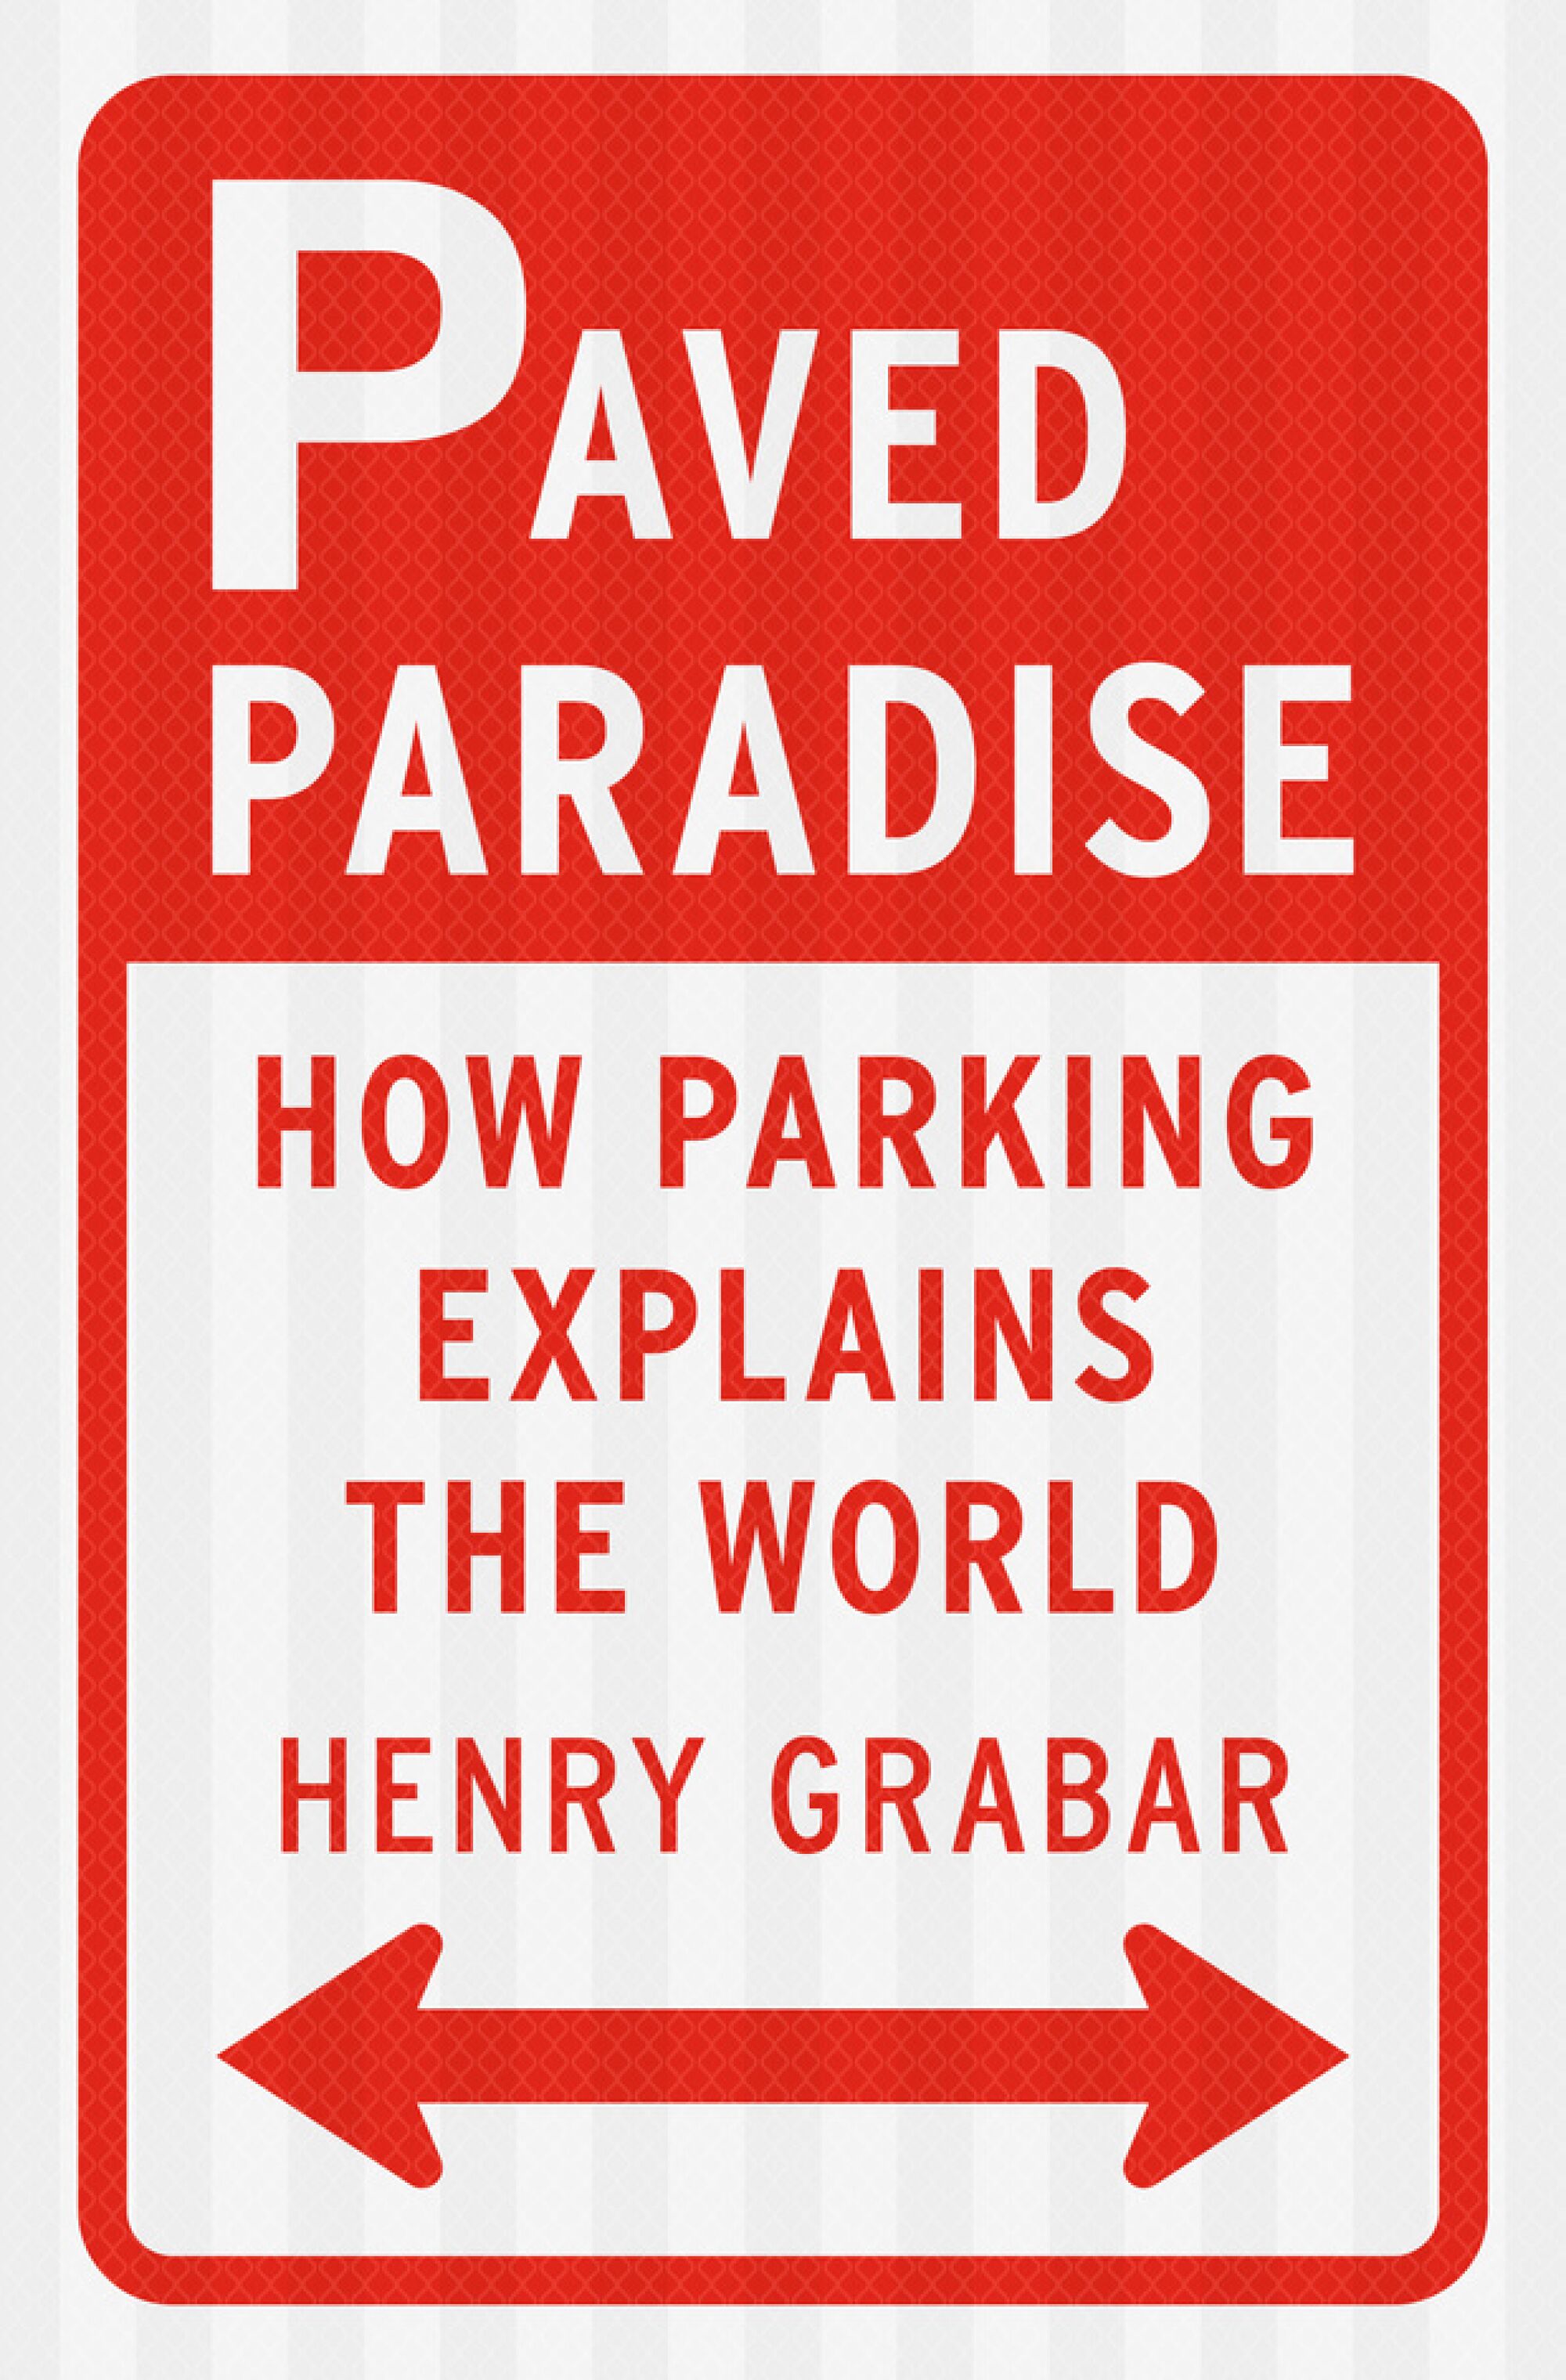 A red and white book cover resembling a parking sign reads "Paved Paradise: How Parking Explains the World."